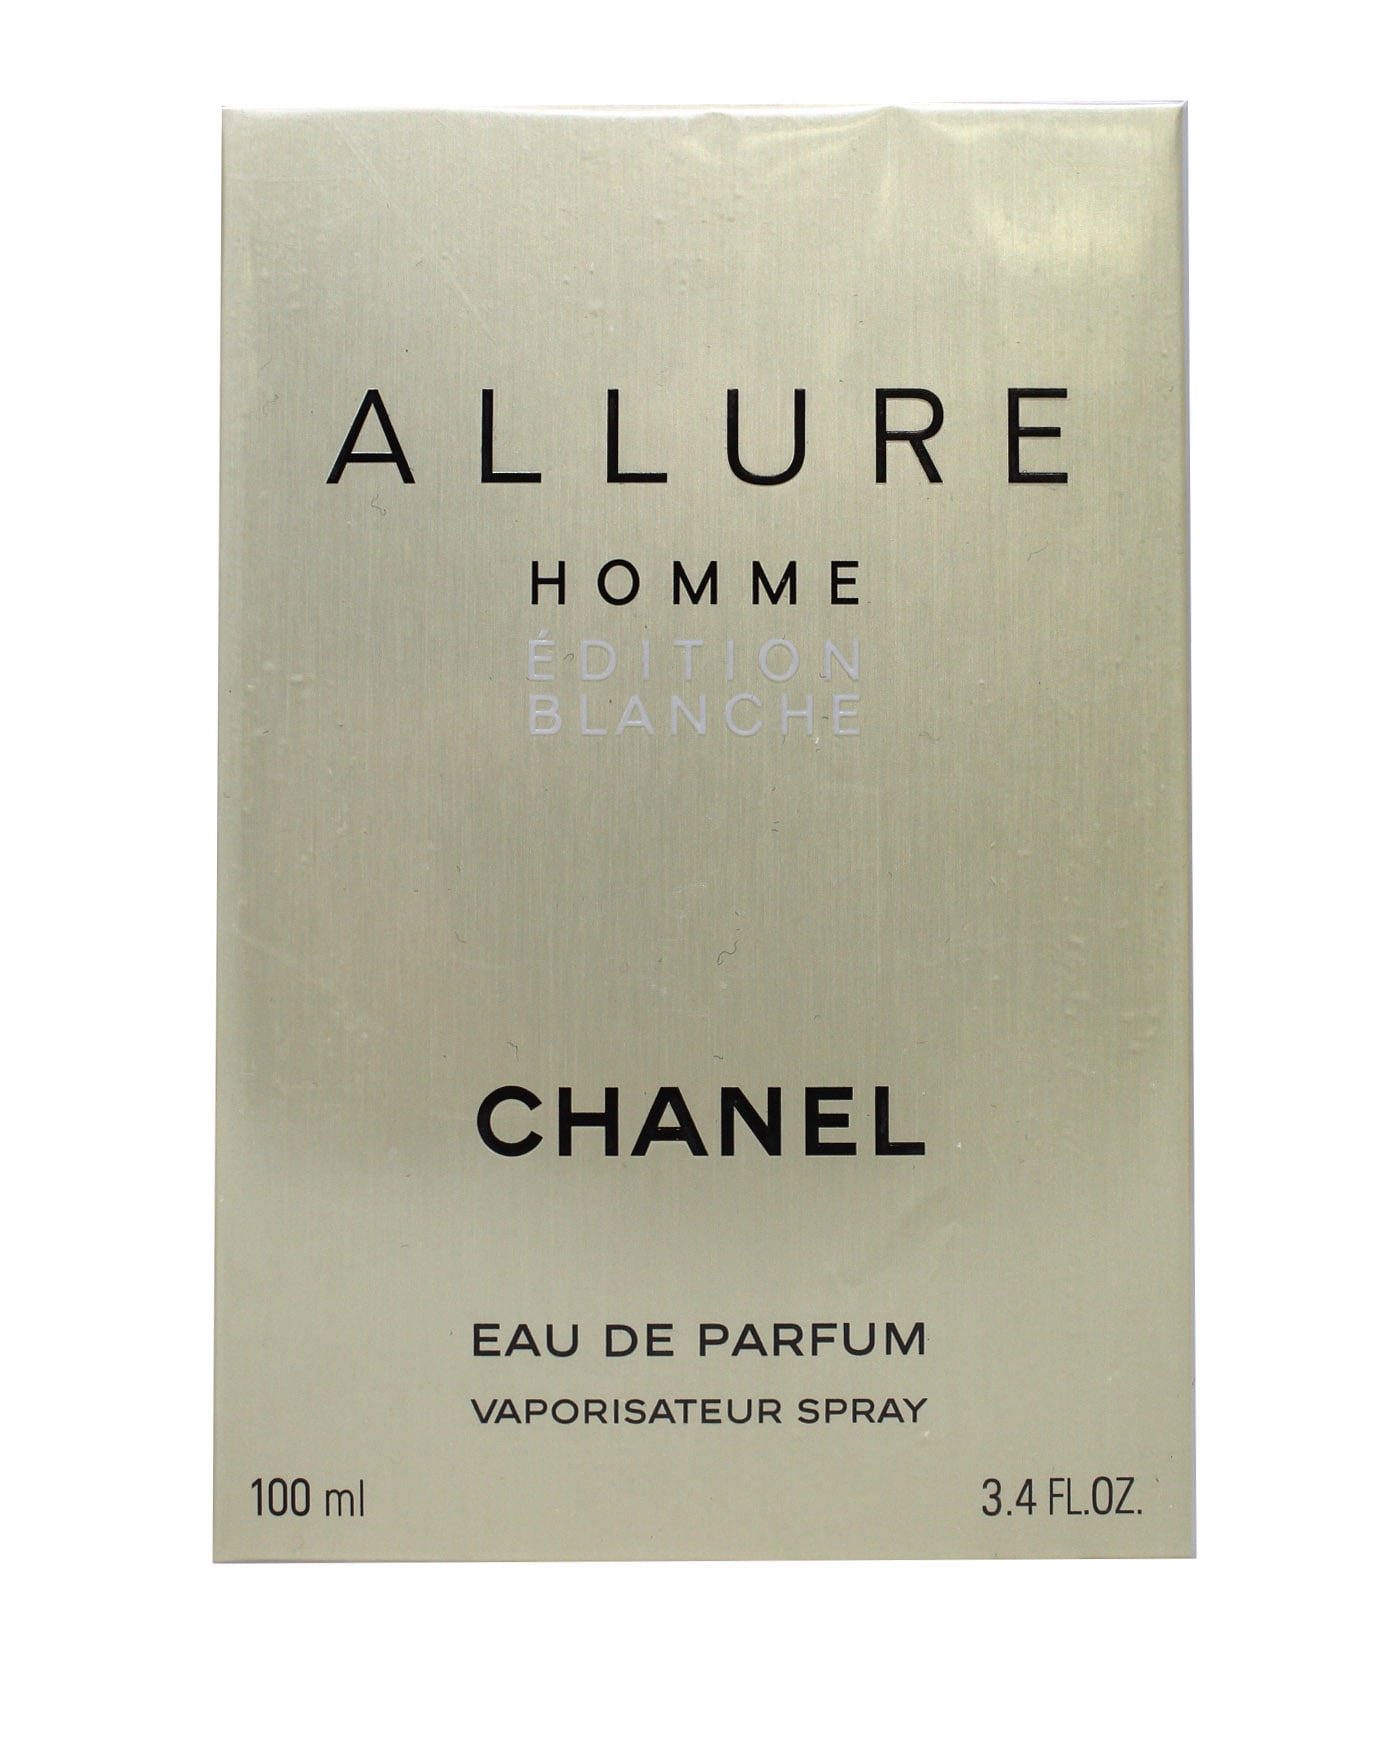 chanel allure homme edition blanche sample